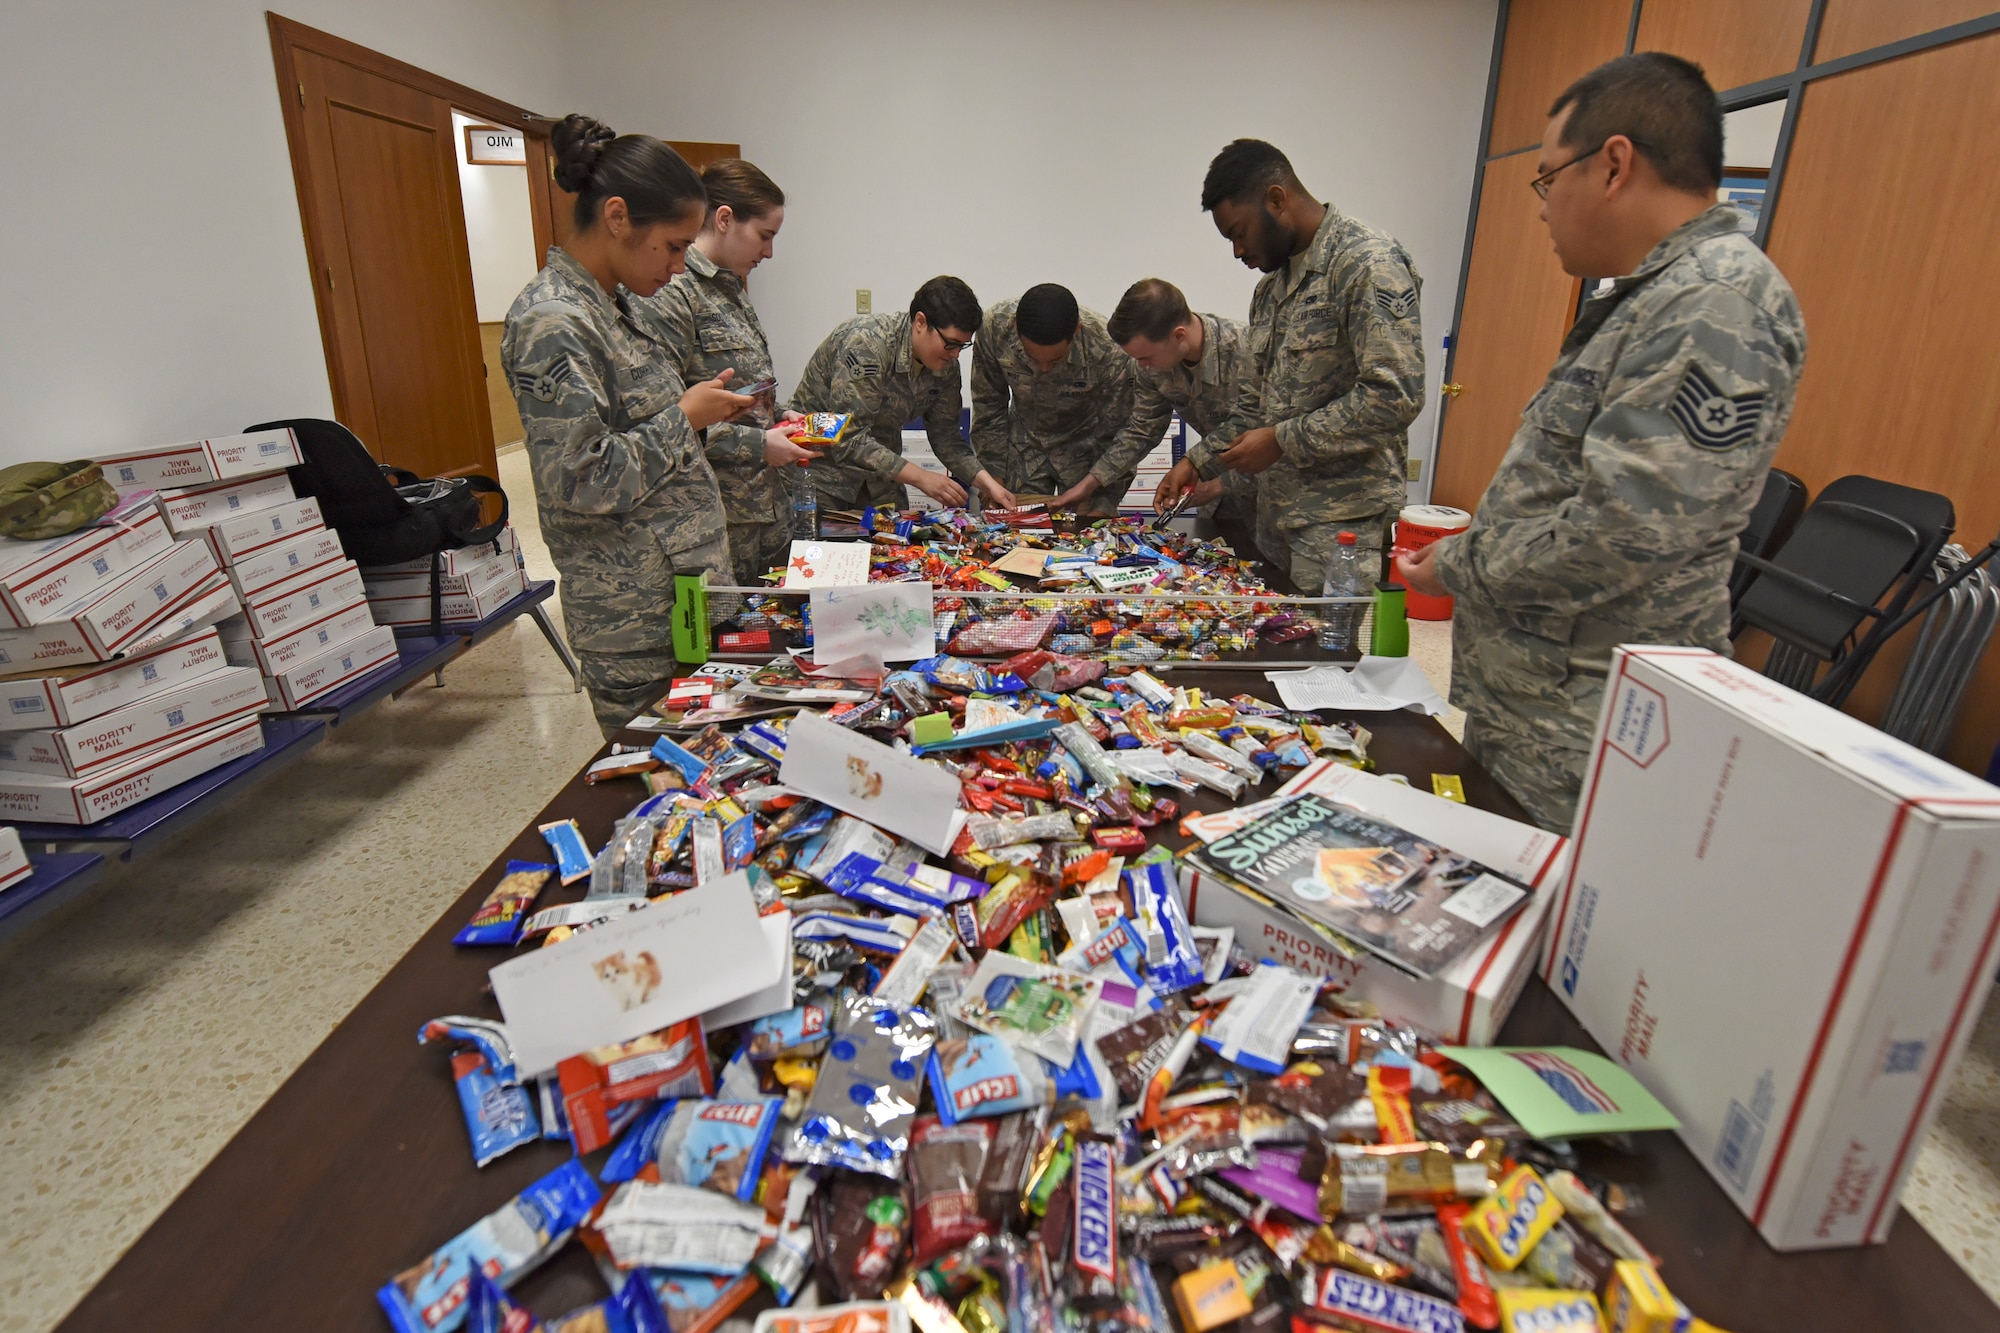 Team Fairchild Airmen stationed abroad open a Treats 2 Troops package Dec. 4, 2018, at Morón Air Base, Spain. Treats 2 Troops is part of KREM 2 News' initiative to spread holiday cheer to military service members stationed abroad during the holiday season. (U.S. Air Force photo/Staff Sgt. Mackenzie Mendez)